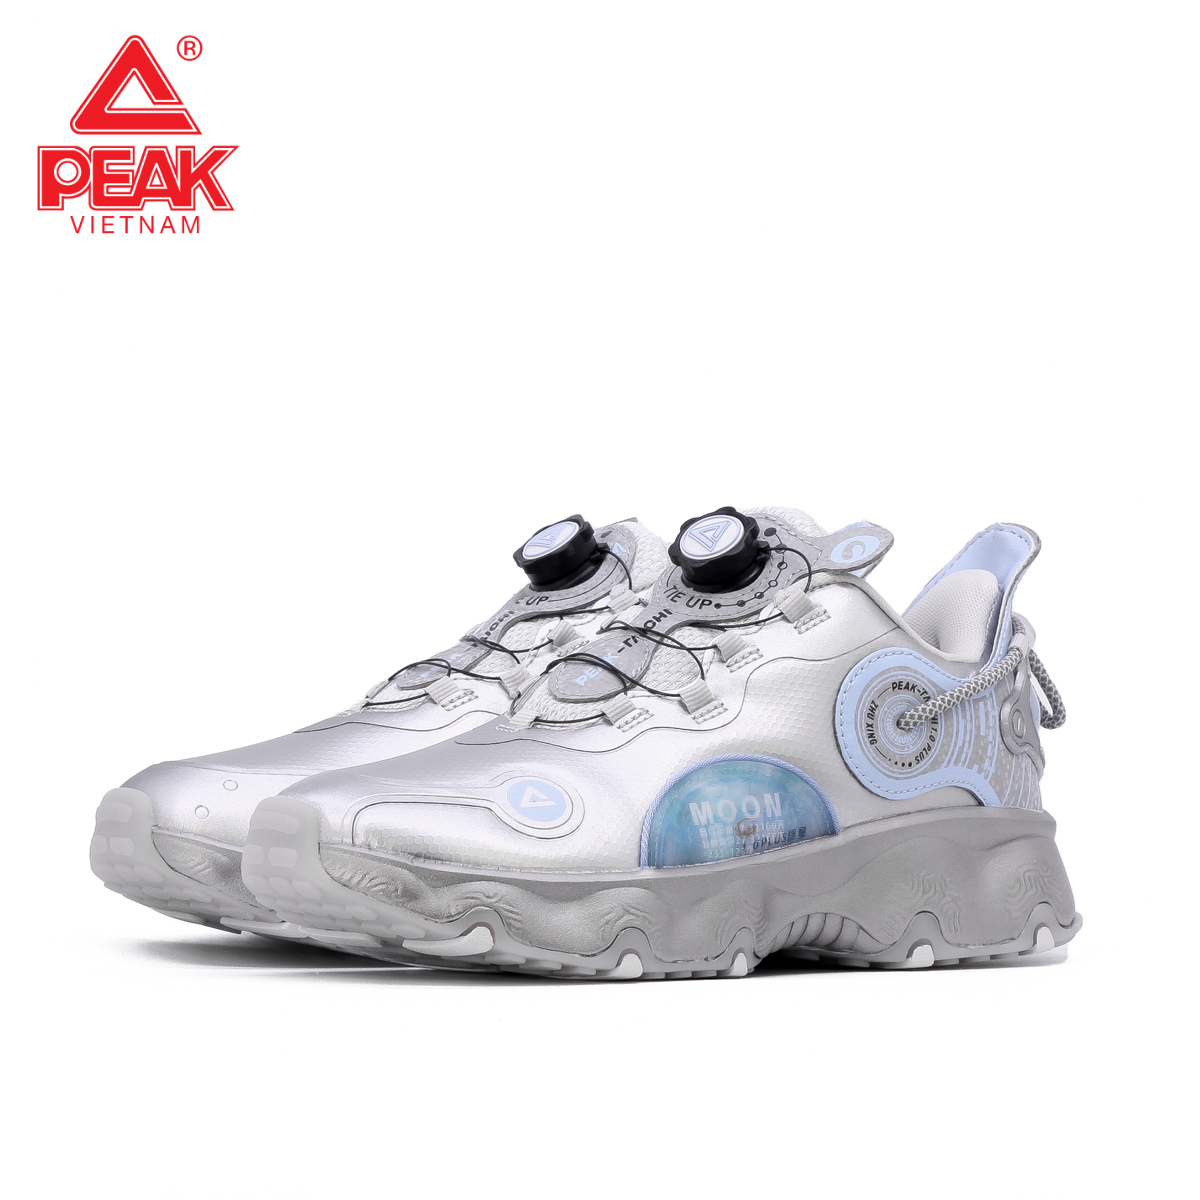 New Rare Reebok The Delivery White Basketball Shoes (2010) Mens 11, 11.5,  13 OSS | eBay